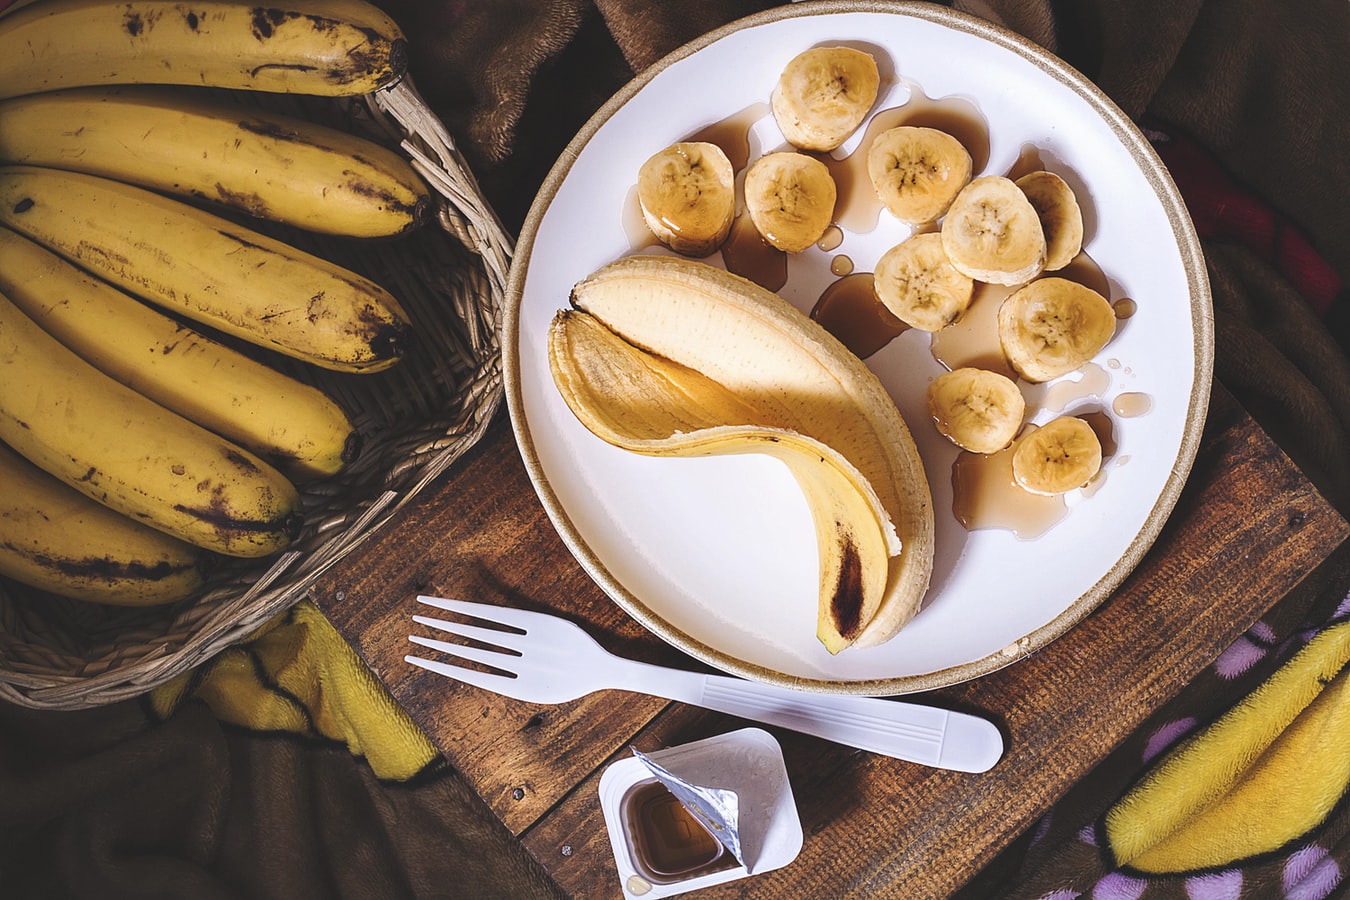 Things to Consider For Refrigerating Bananas